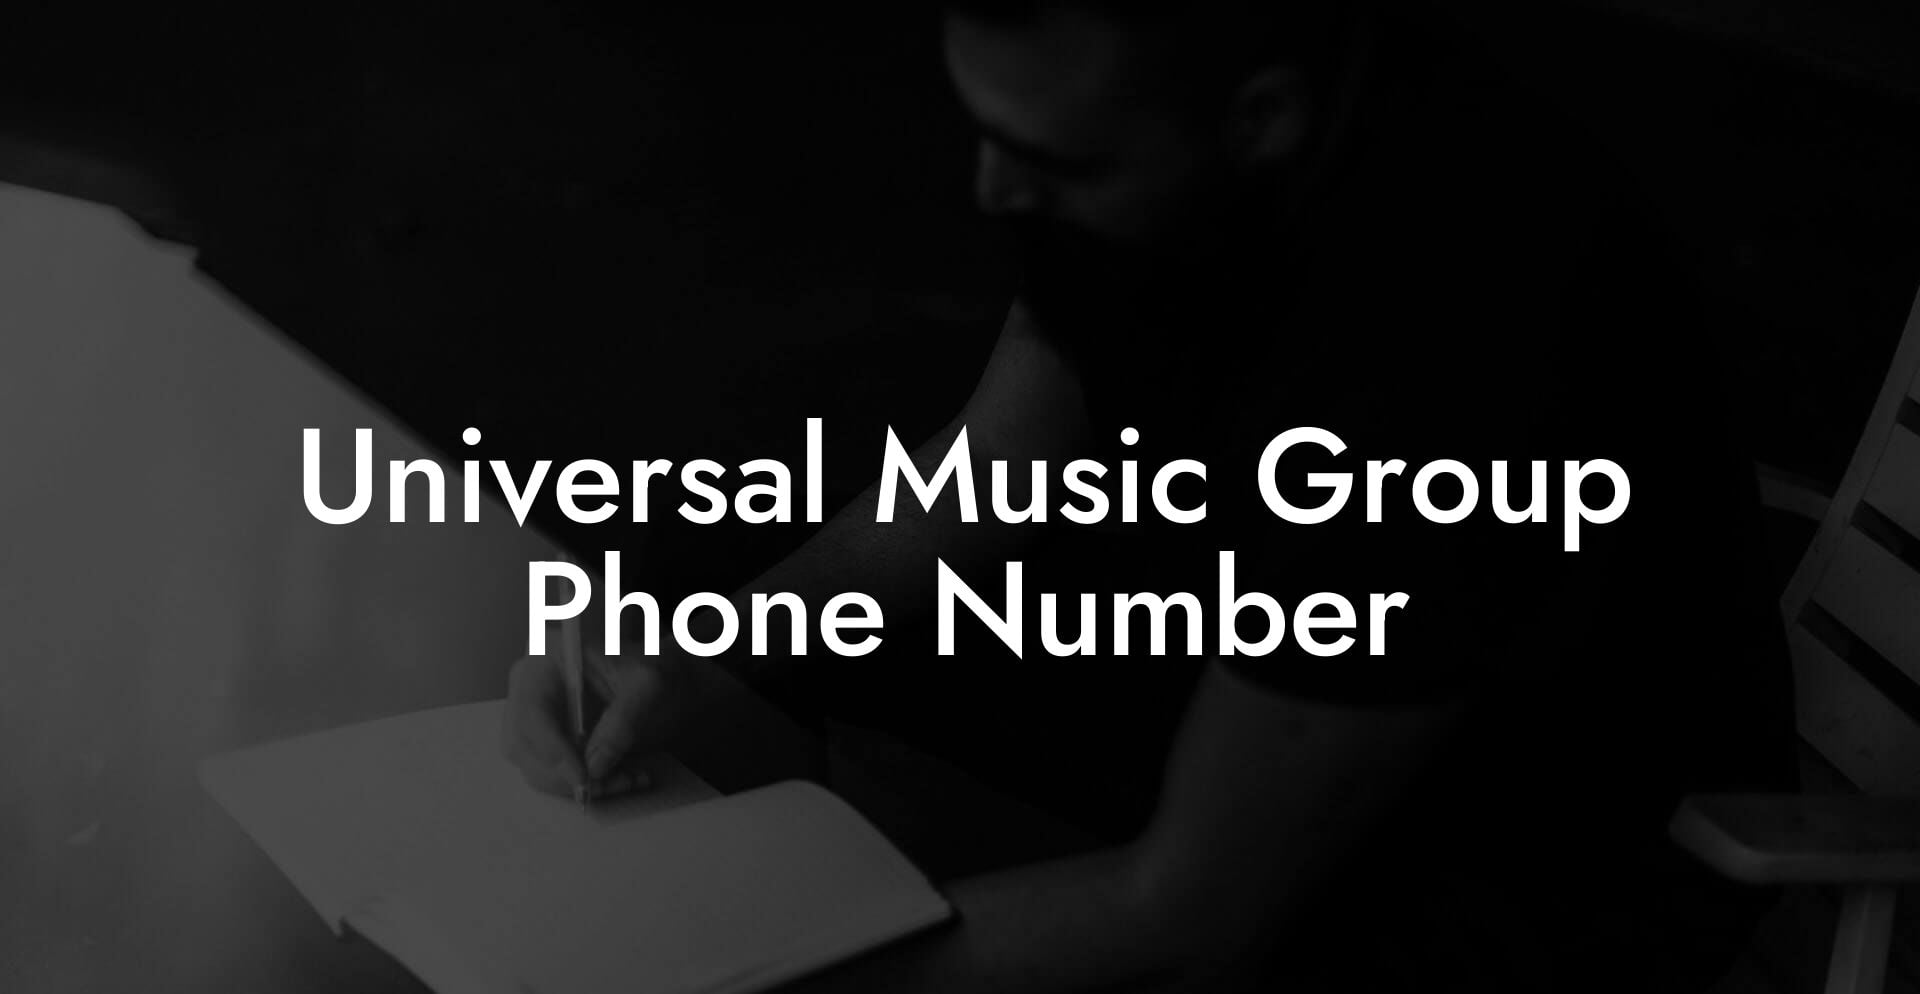 Universal Music Group Phone Number